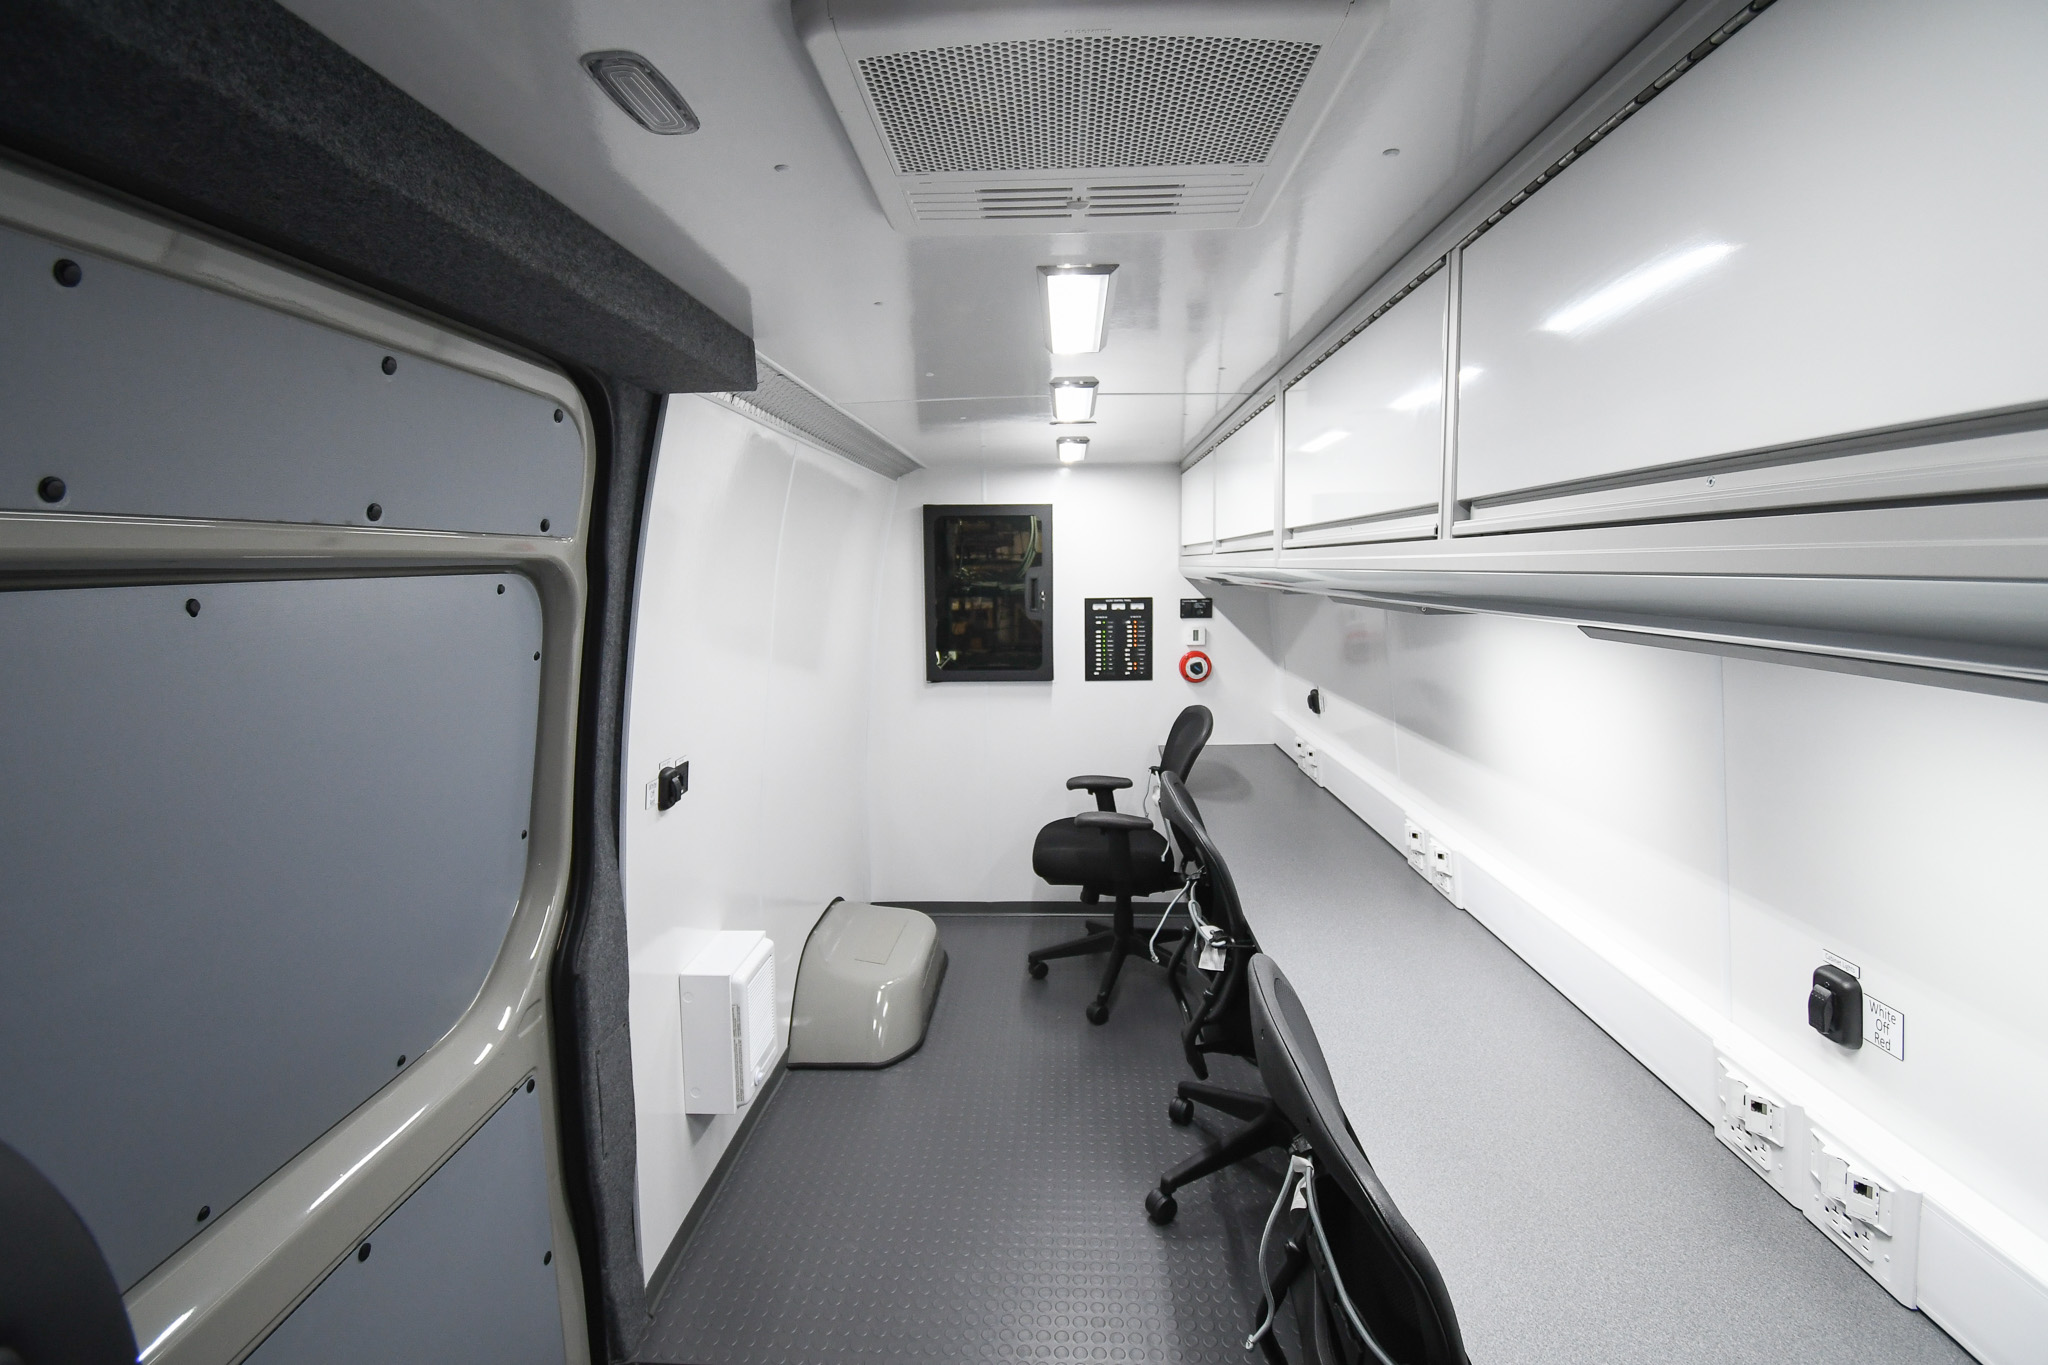 A front-to-back view inside the unit for West Chester, OH.